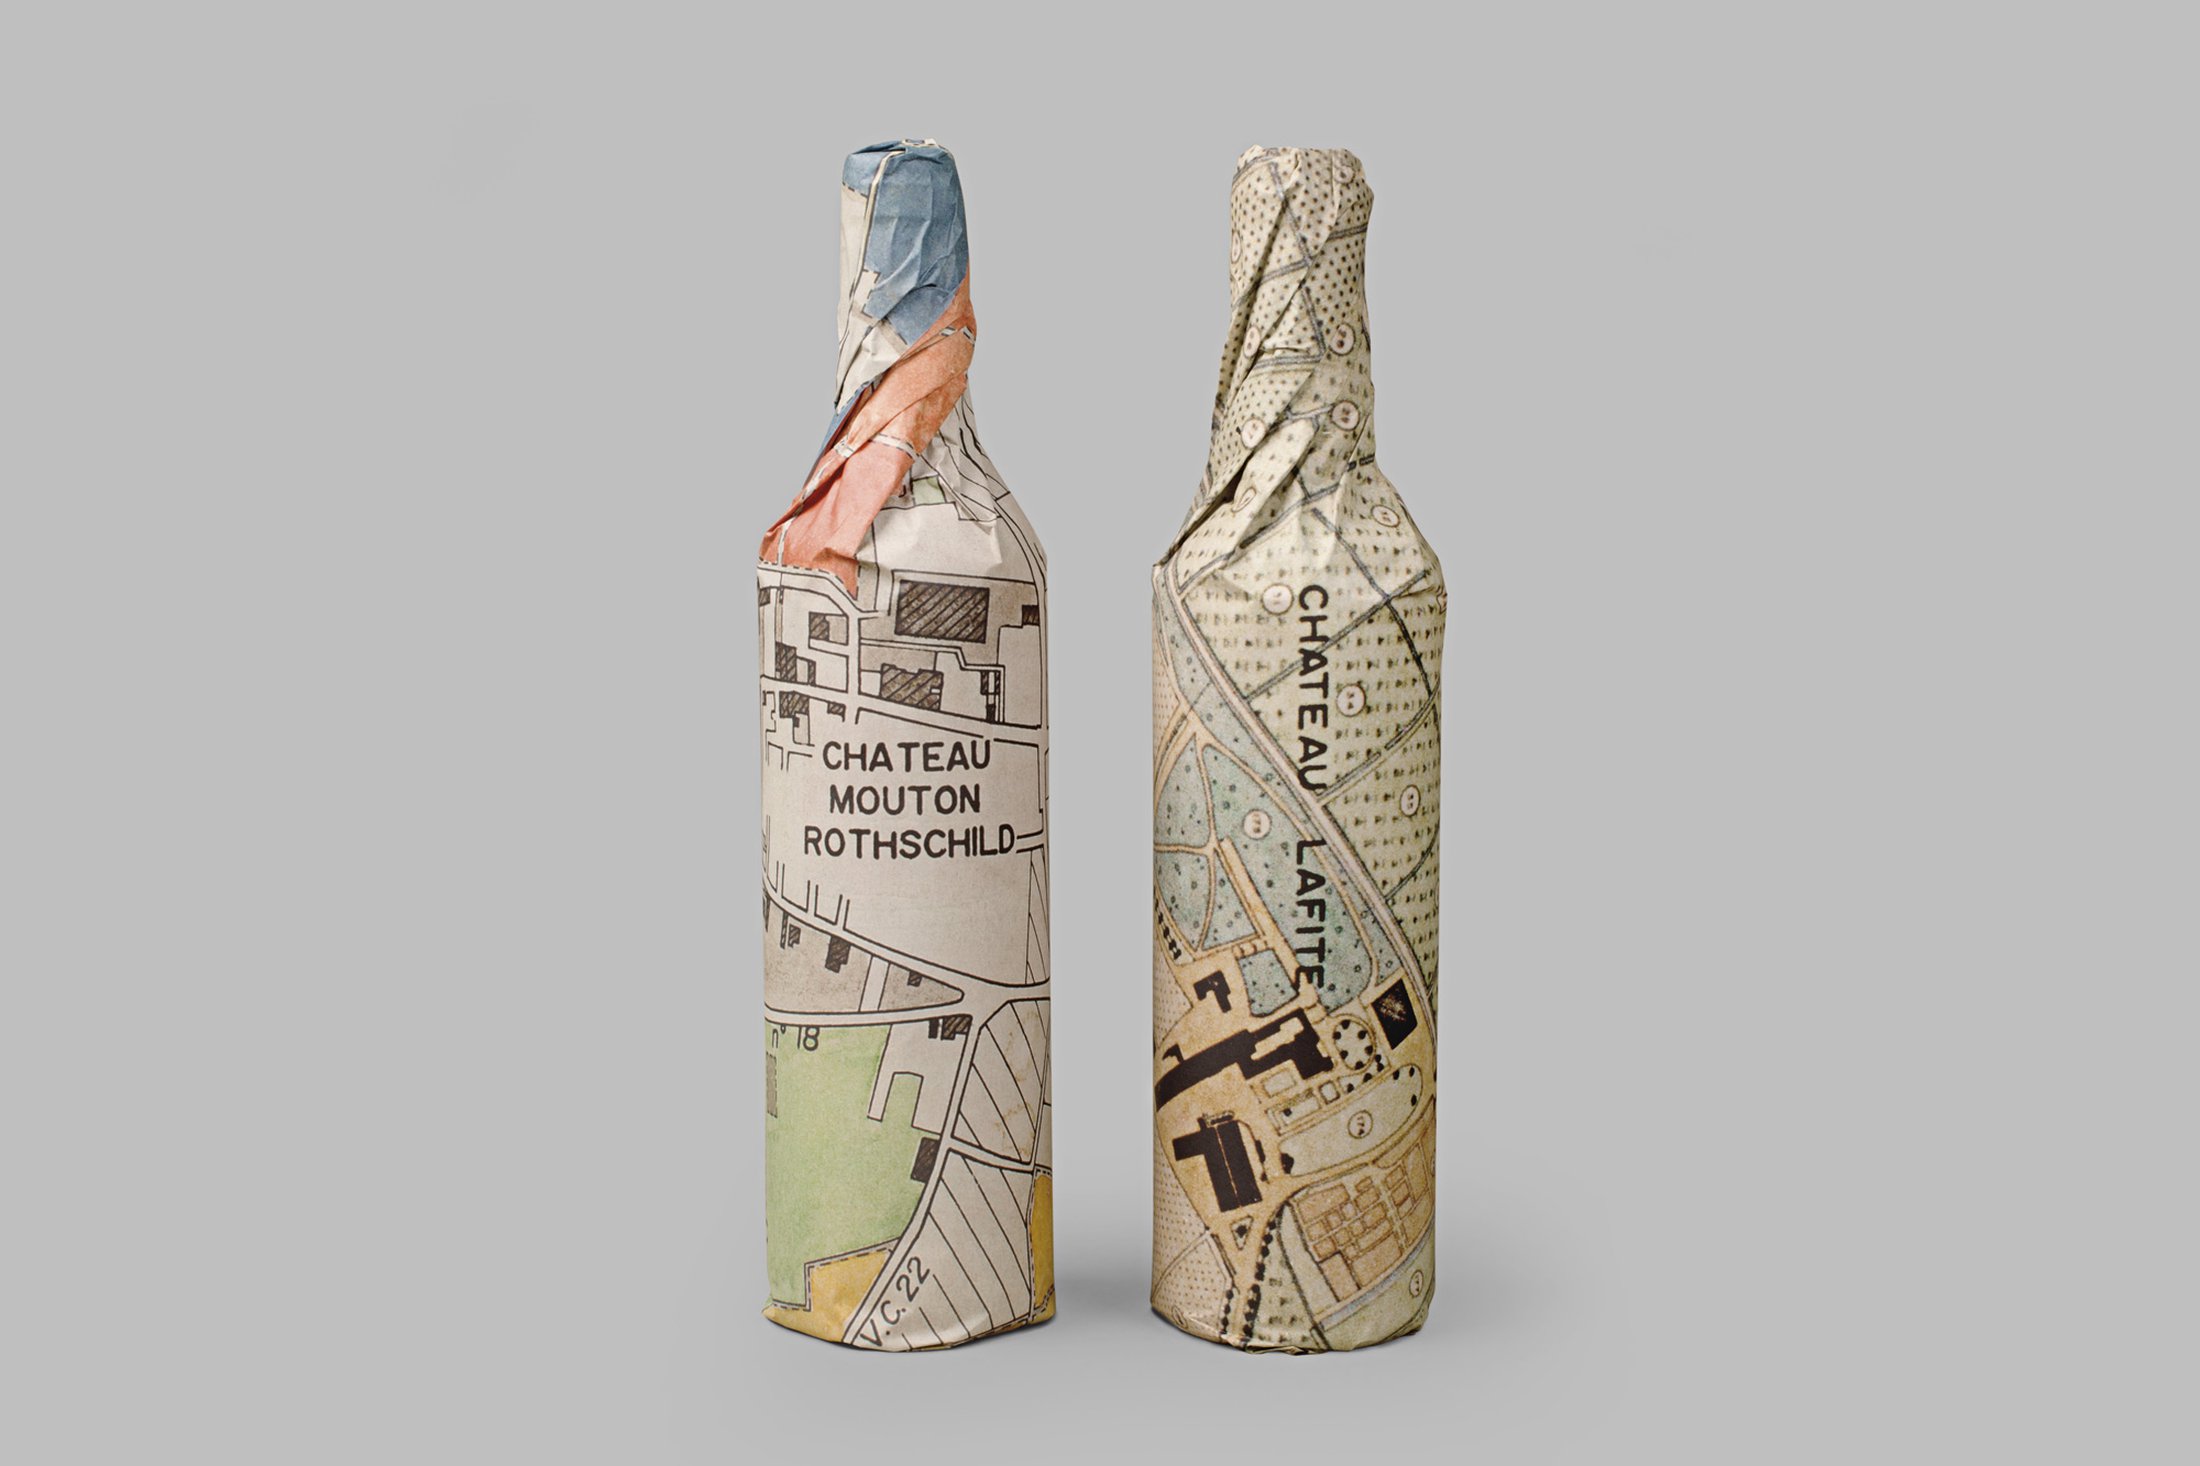 Innovative wine packaging for Château Lafite Rothschild and Château Mouton Rothschild, using vintage maps of the respective vineyards.